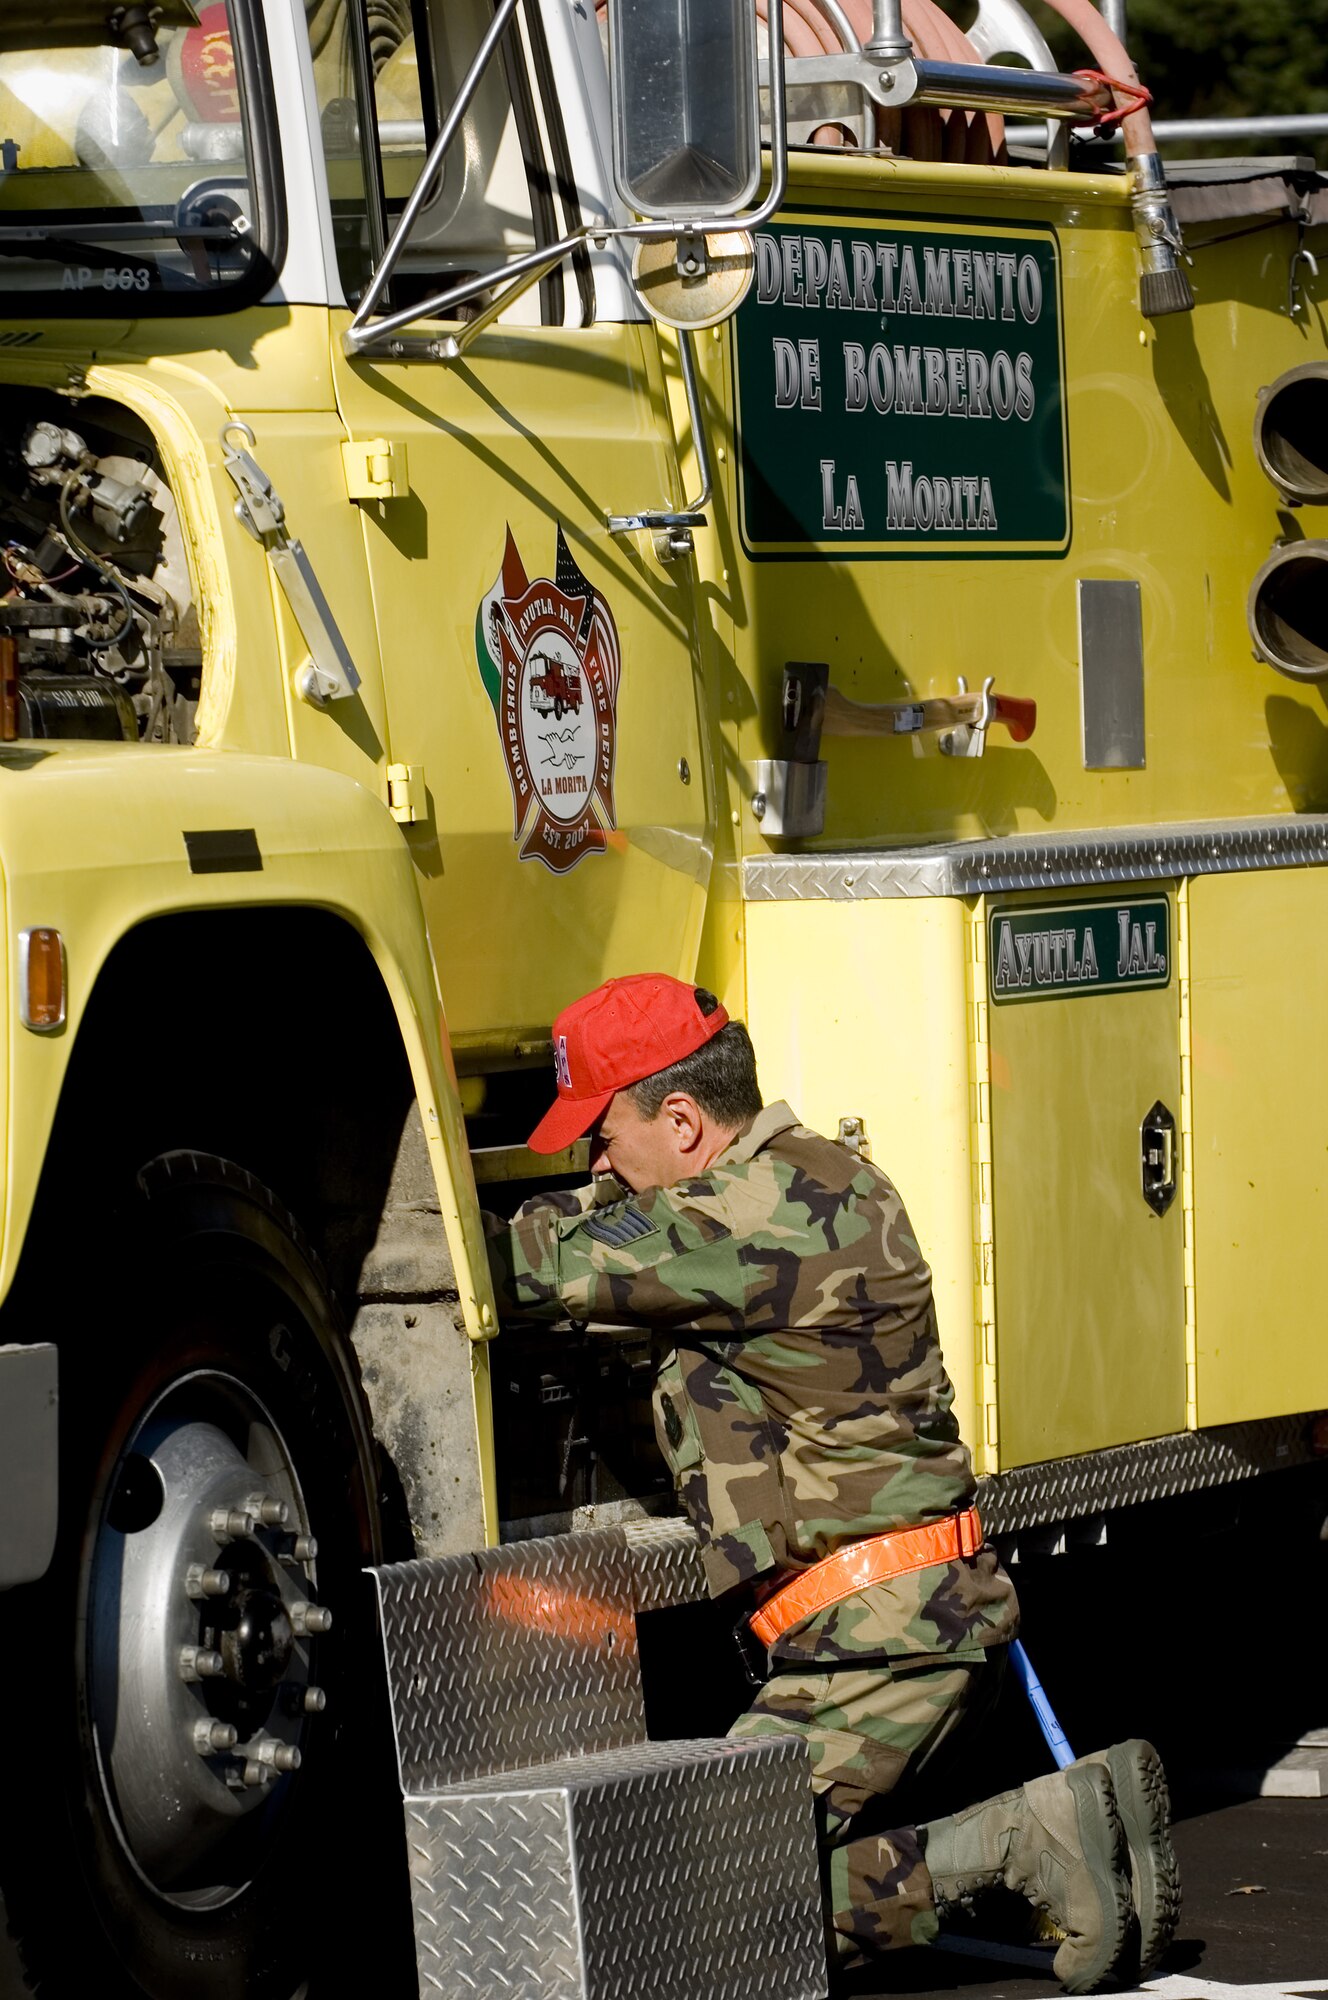 Tech Sgt. Dirk Gillespie, 86th Aerial Port Squadron, McChord Air Force Base, Wash., prepares a fire truck for a joint inspection before it can be loaded onto a C-17.  The fire truck, along with pallets of rescue equipment, was flown by Air Force Reserve aircrews here to Guadalajara, Mexico on Sept. 19.  Using the Denton Amendment, three local non-profit agencies worked with the 446th Airlift Wing for more than one year to secure the cargo's transportation to Mexico.  (U.S. Air Force photo/Abner Guzman)